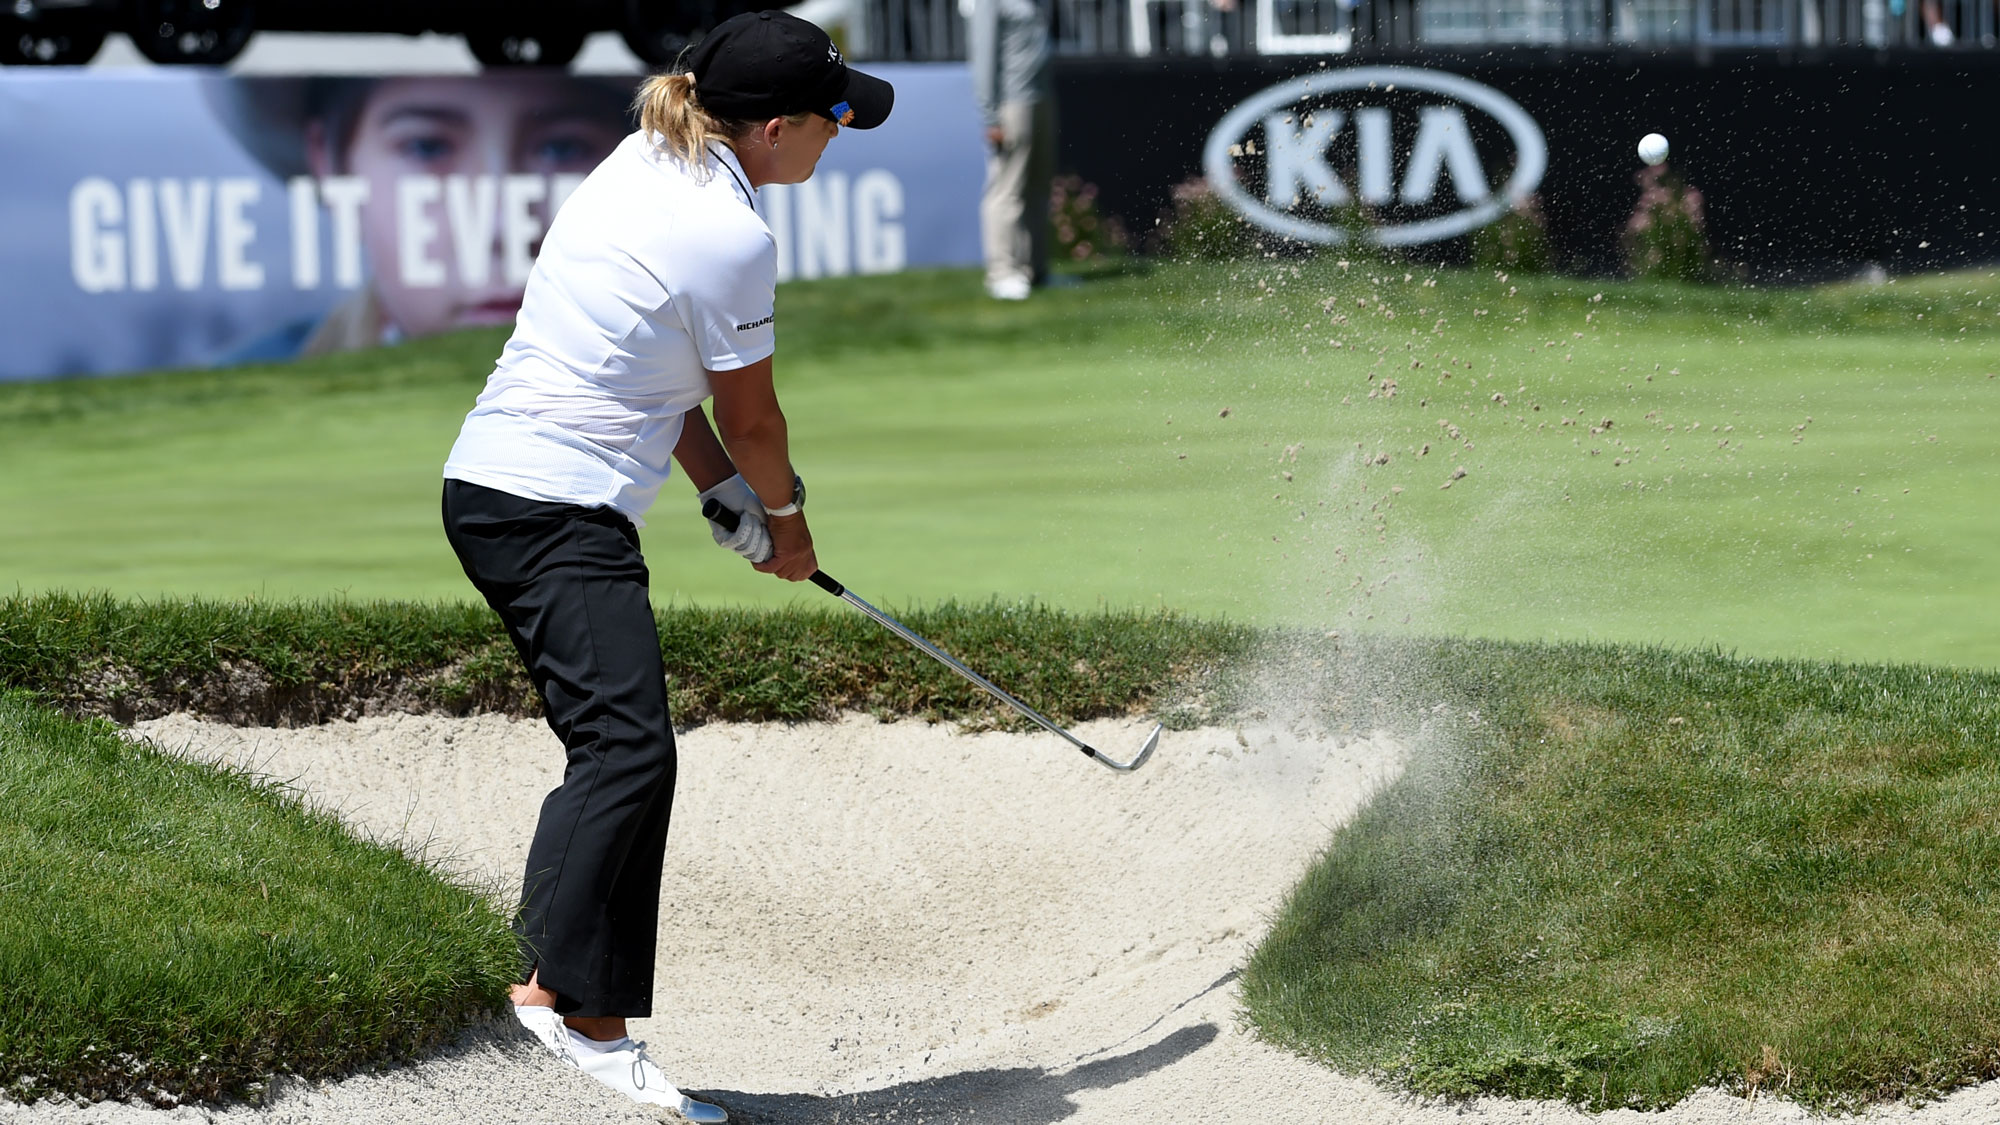 Cristie Kerr hits out of a bunker on the 18th hole during the third round of the Kia Classic